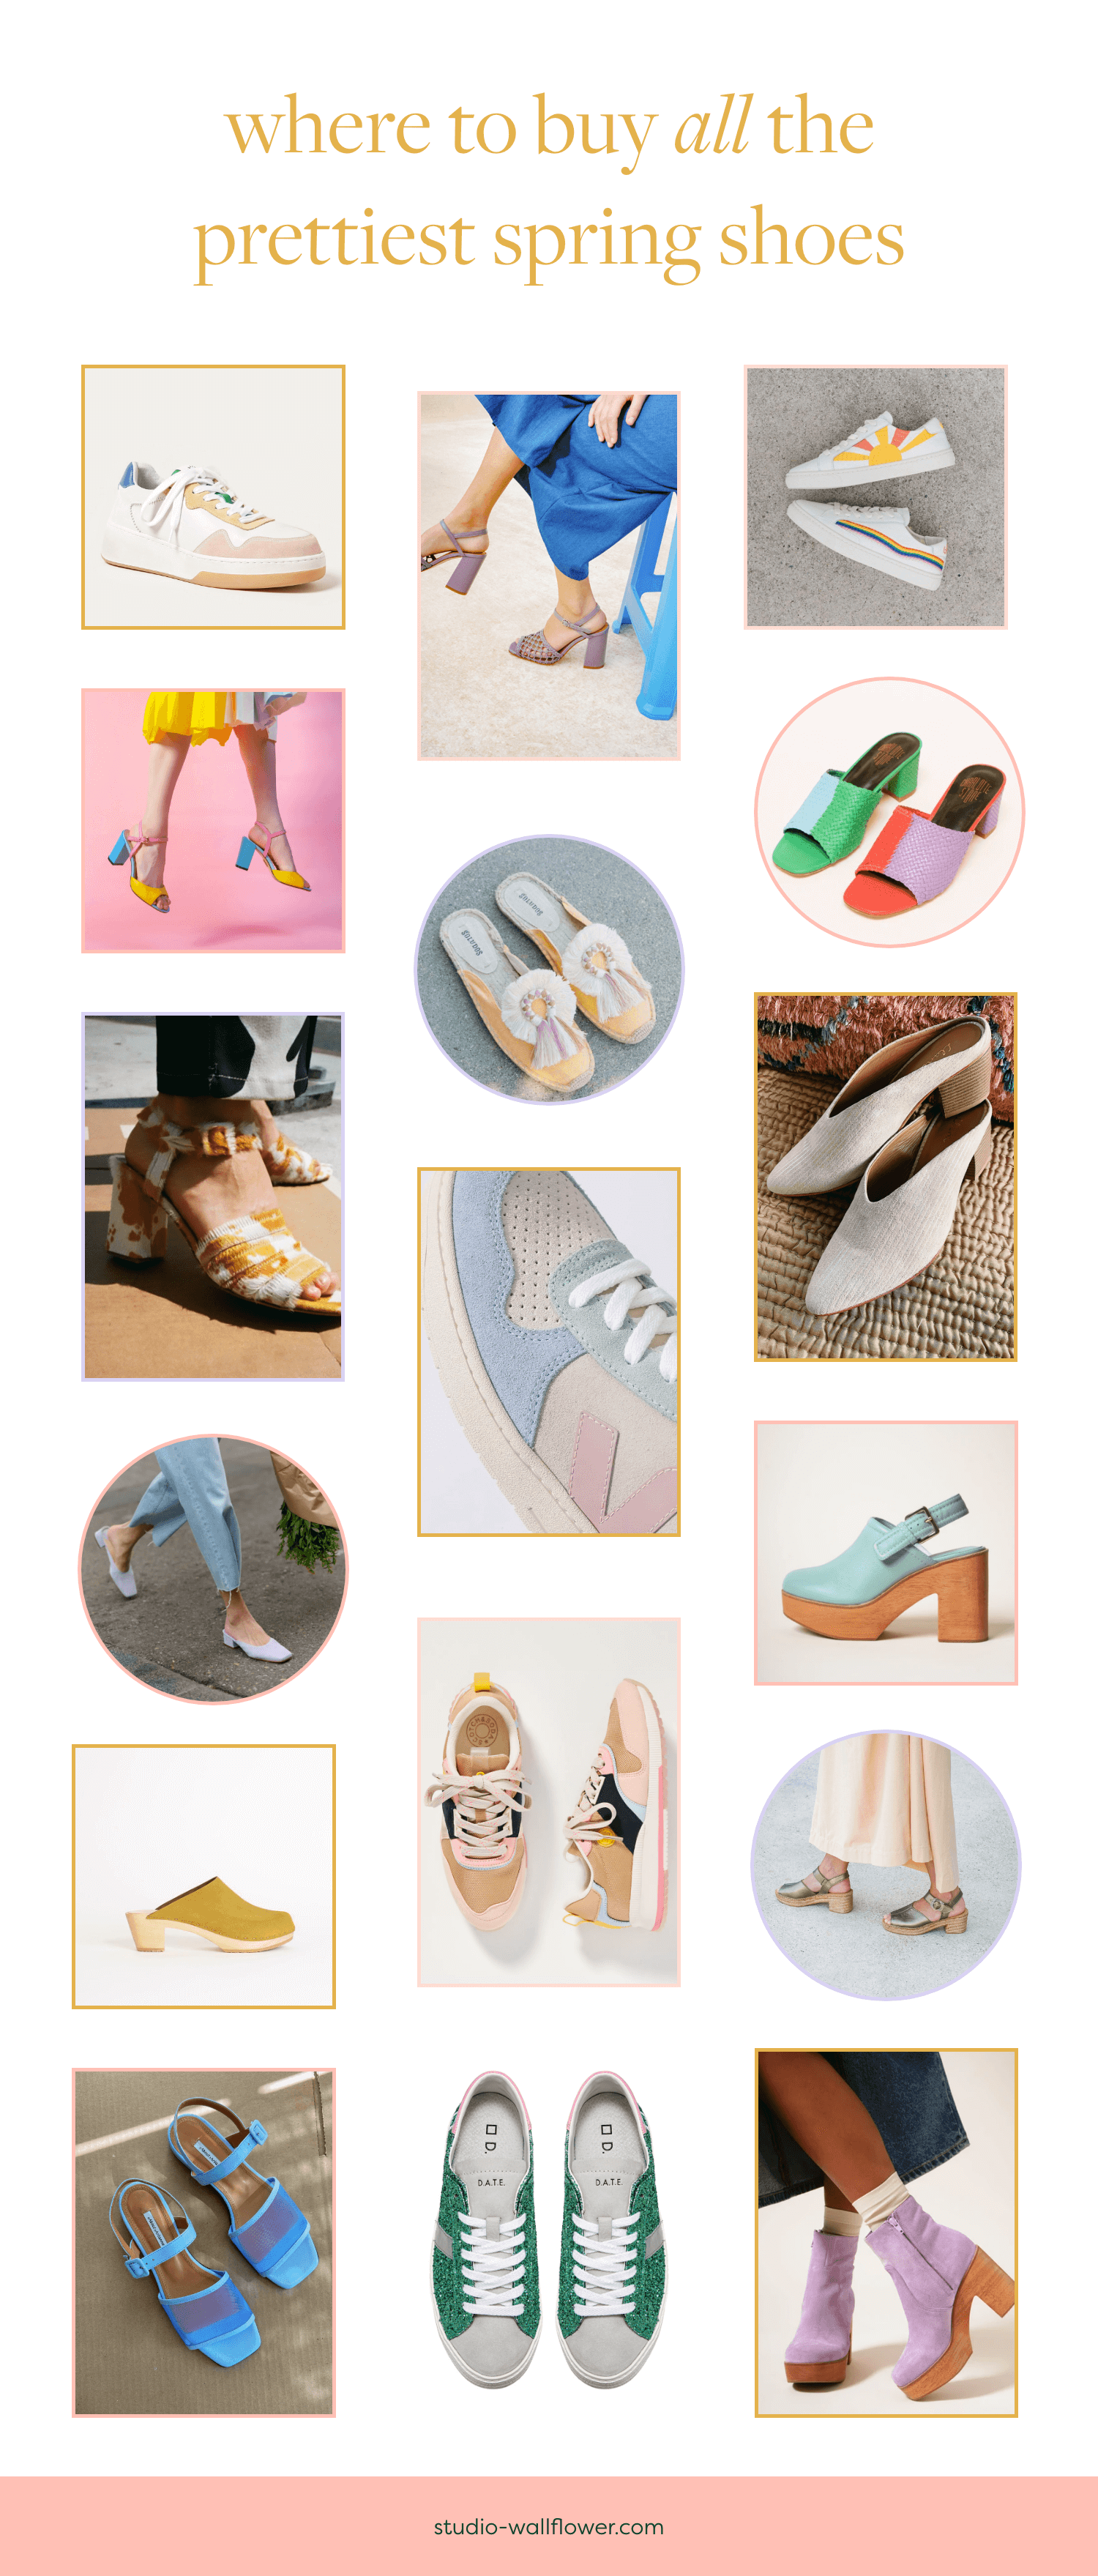 Where to Buy All The Prettiest Spring Shoes -